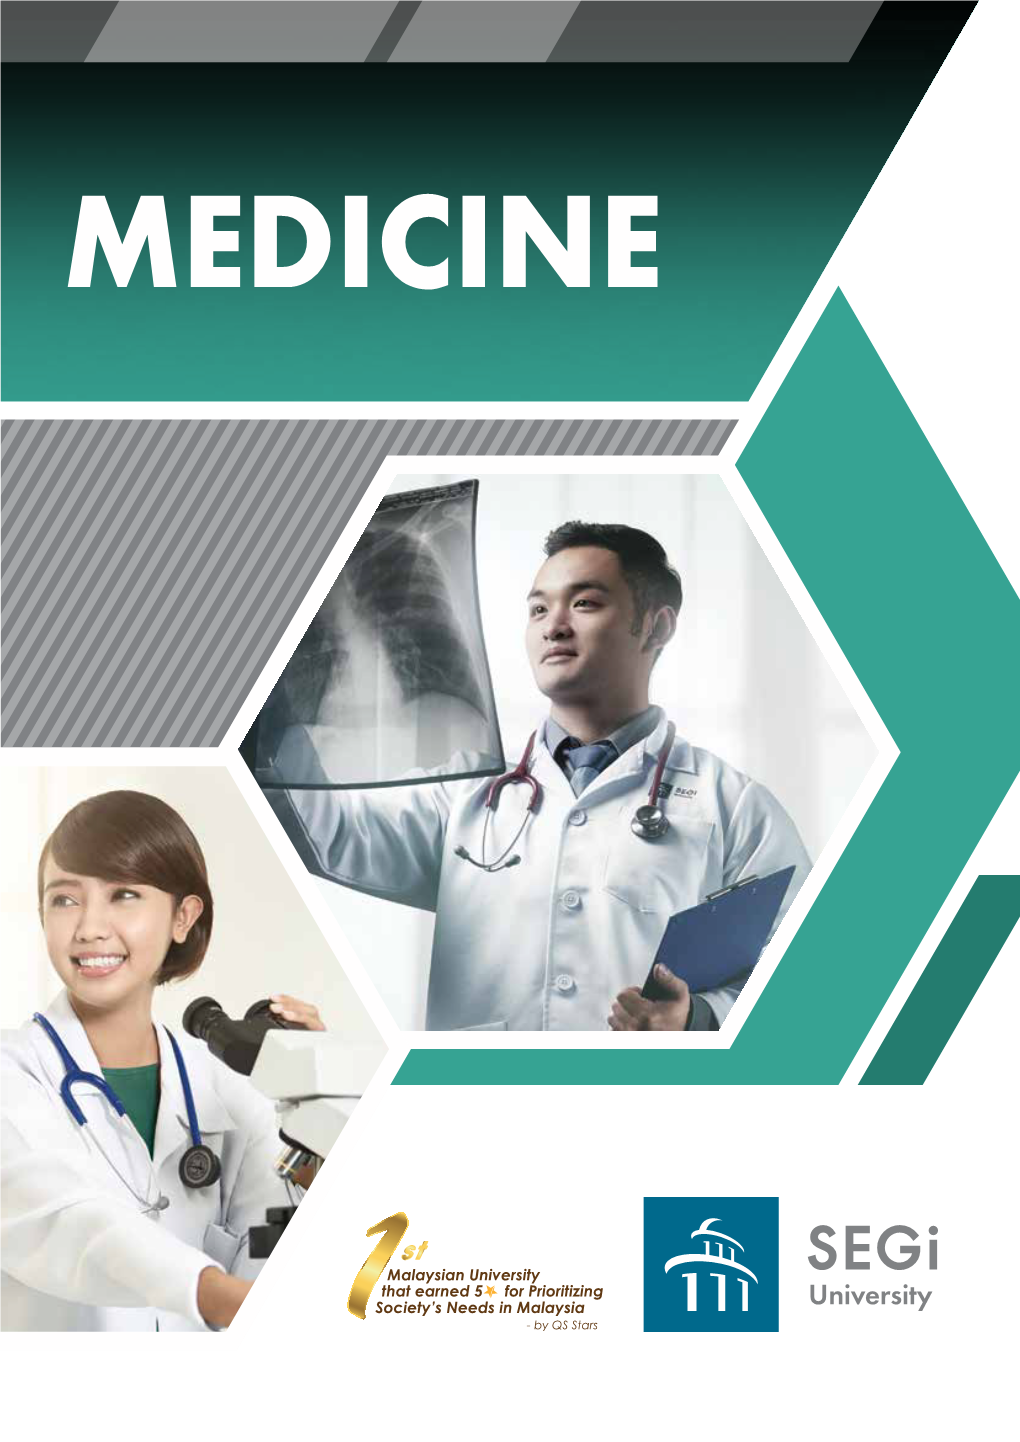 MEDICINE INTRODUCTION to Segi UNIVERSITY Segi Was Established in 1977 As Systematic College in the Heart of Kuala Lumpur Offering Professional Qualifications